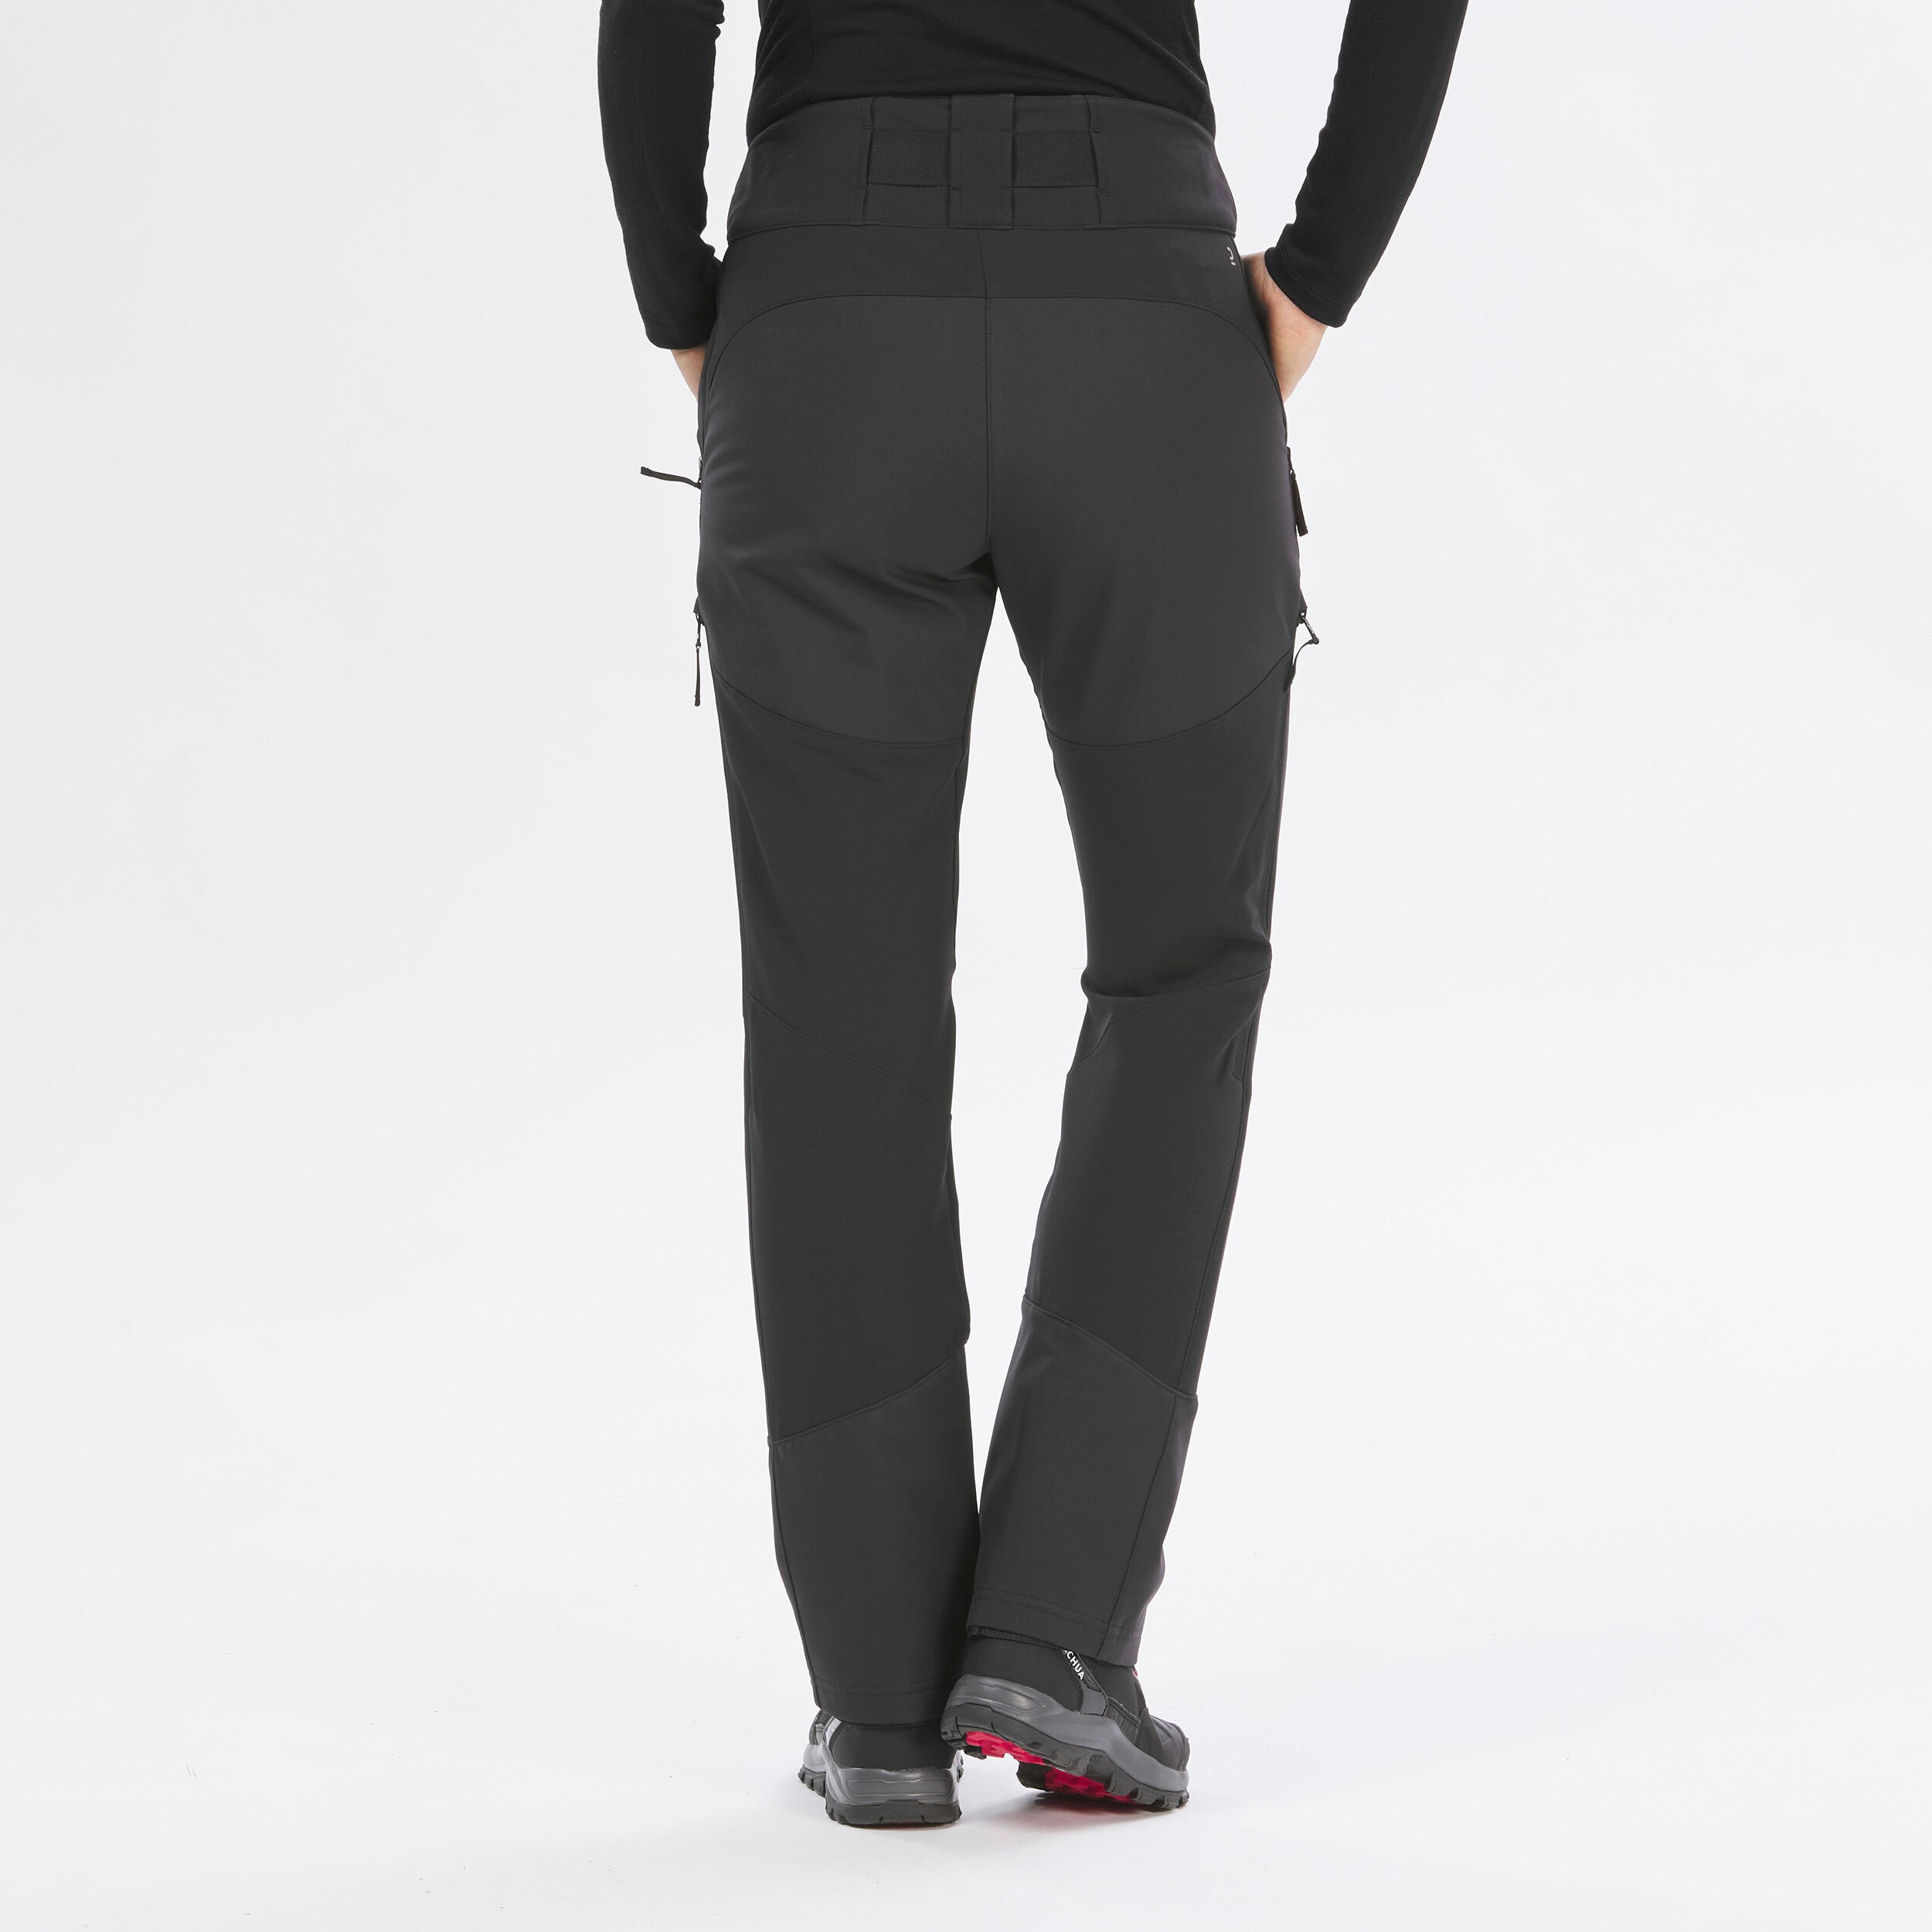 Women’s warm water-repellent ventilated hiking trousers - SH500 MOUNTAIN VENTIL 5/10